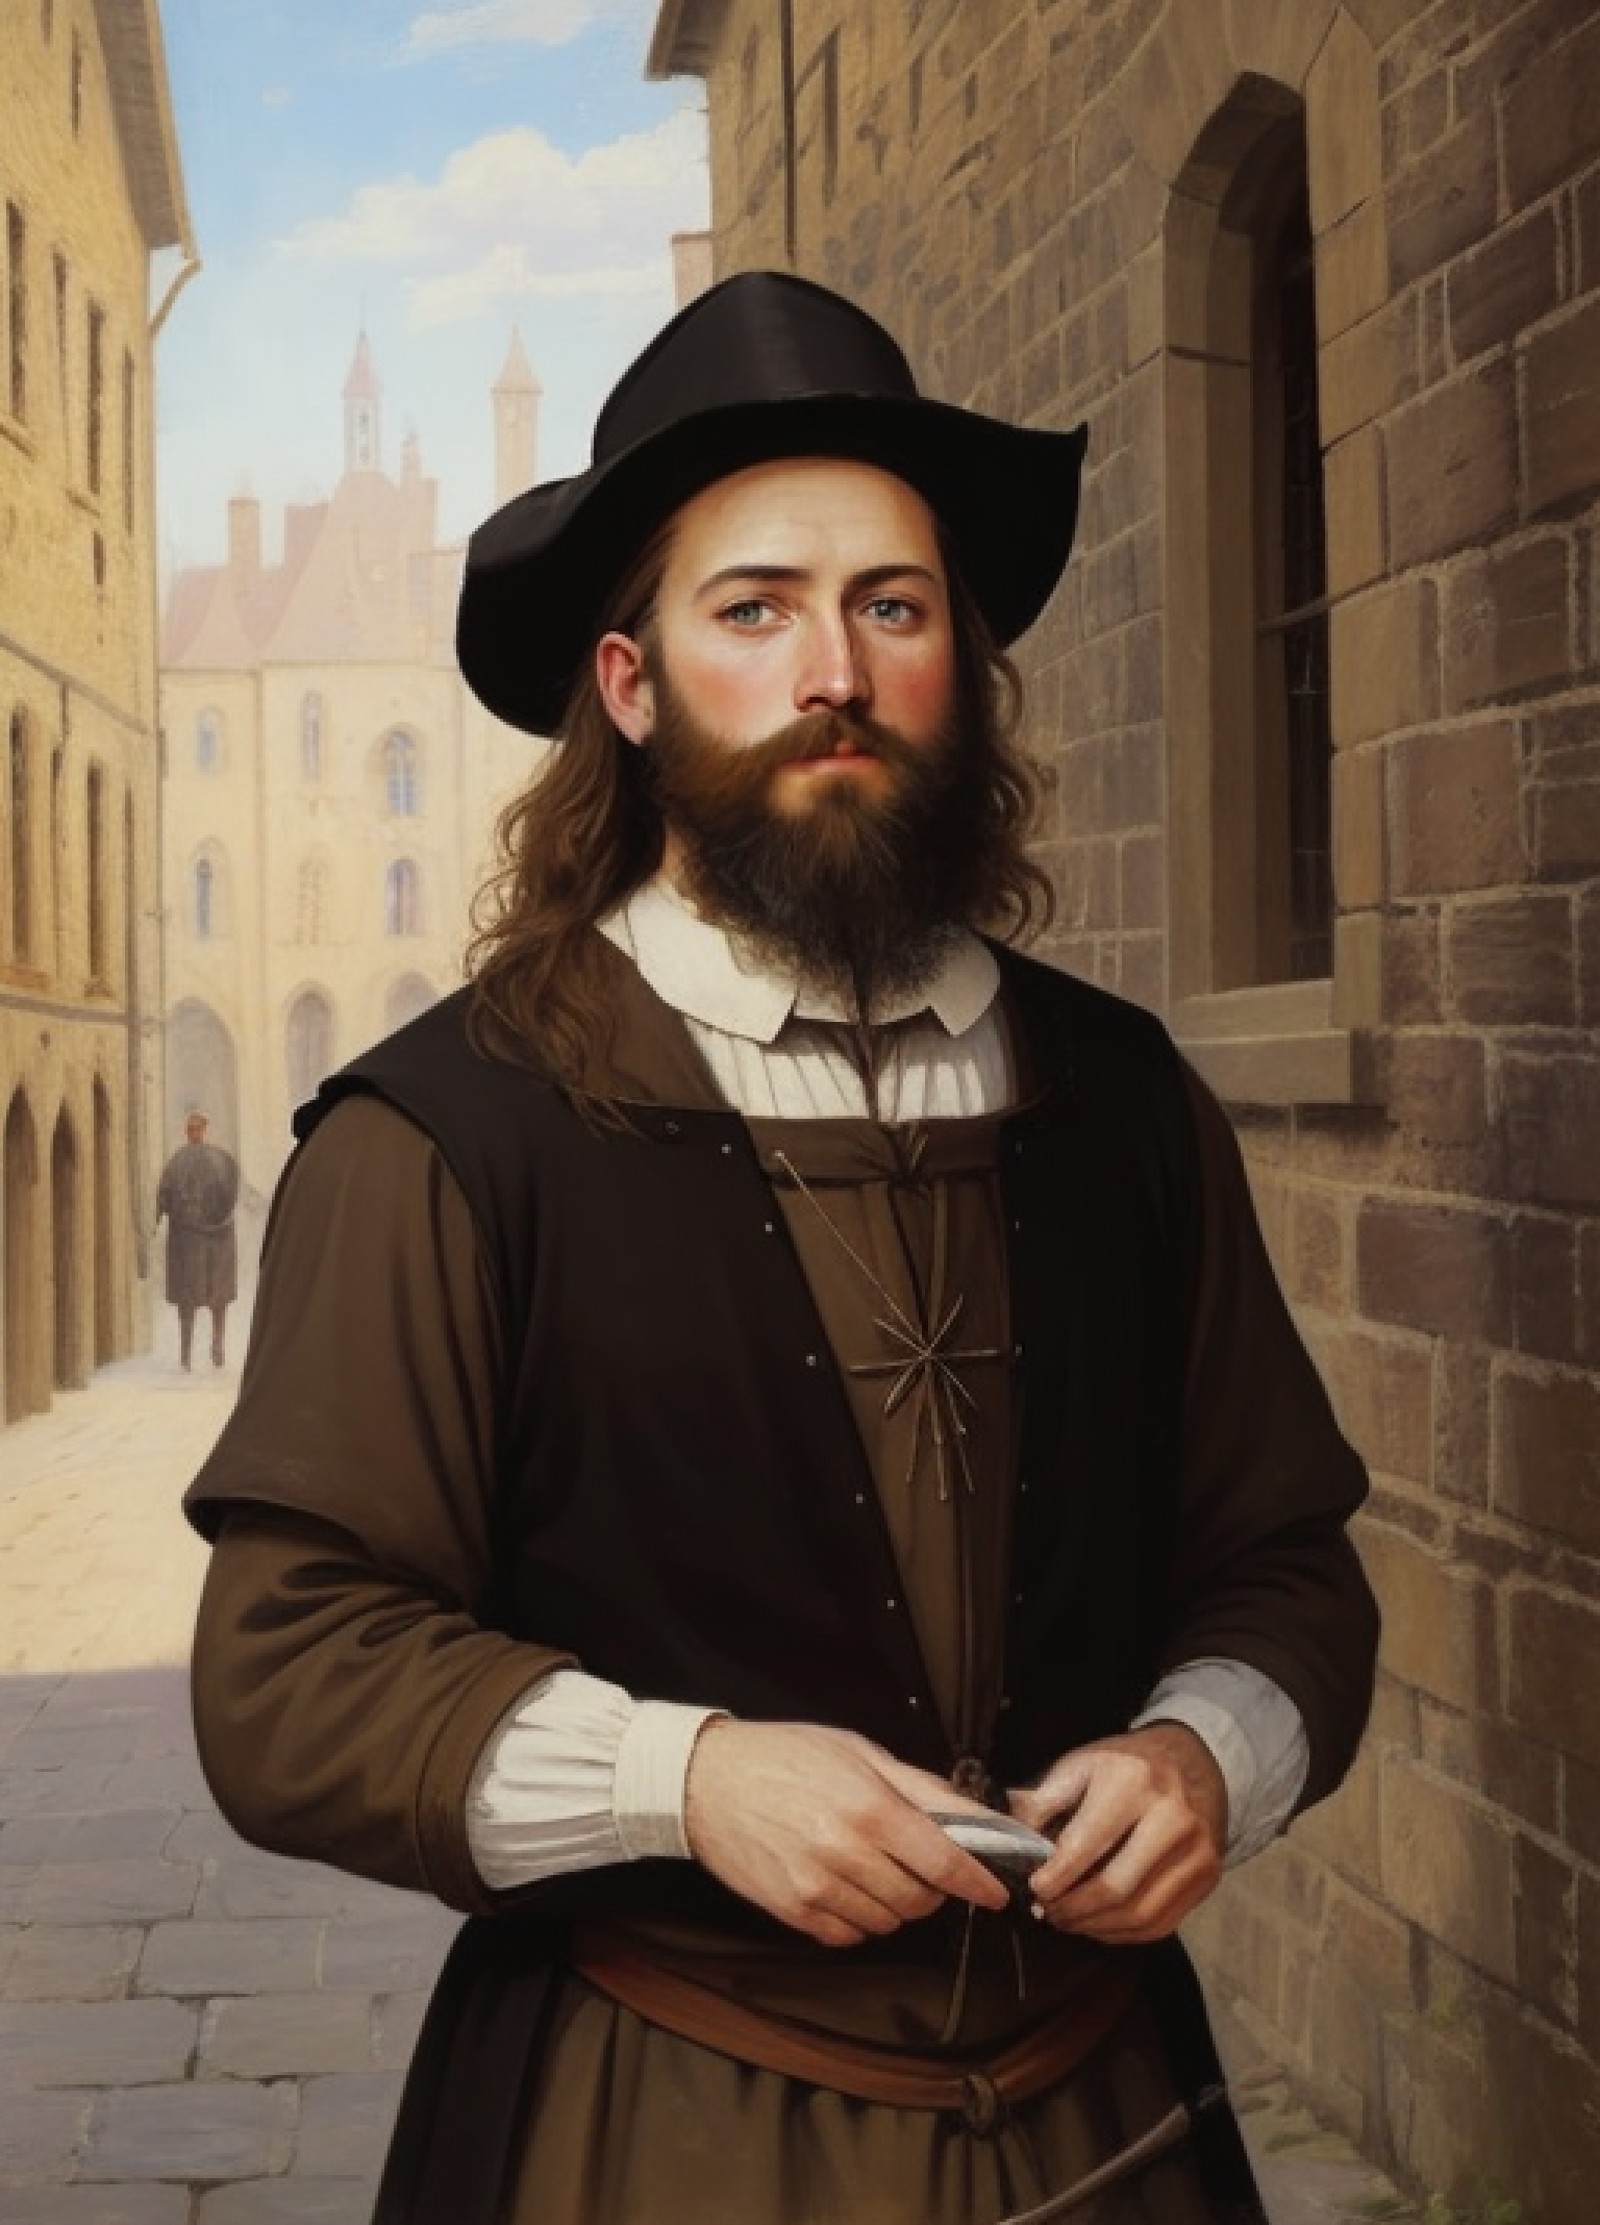 portrait, ((upper body)), 1boy, adult, beard, classy, oil painting style, oil painting, ((noon, medieval street background...